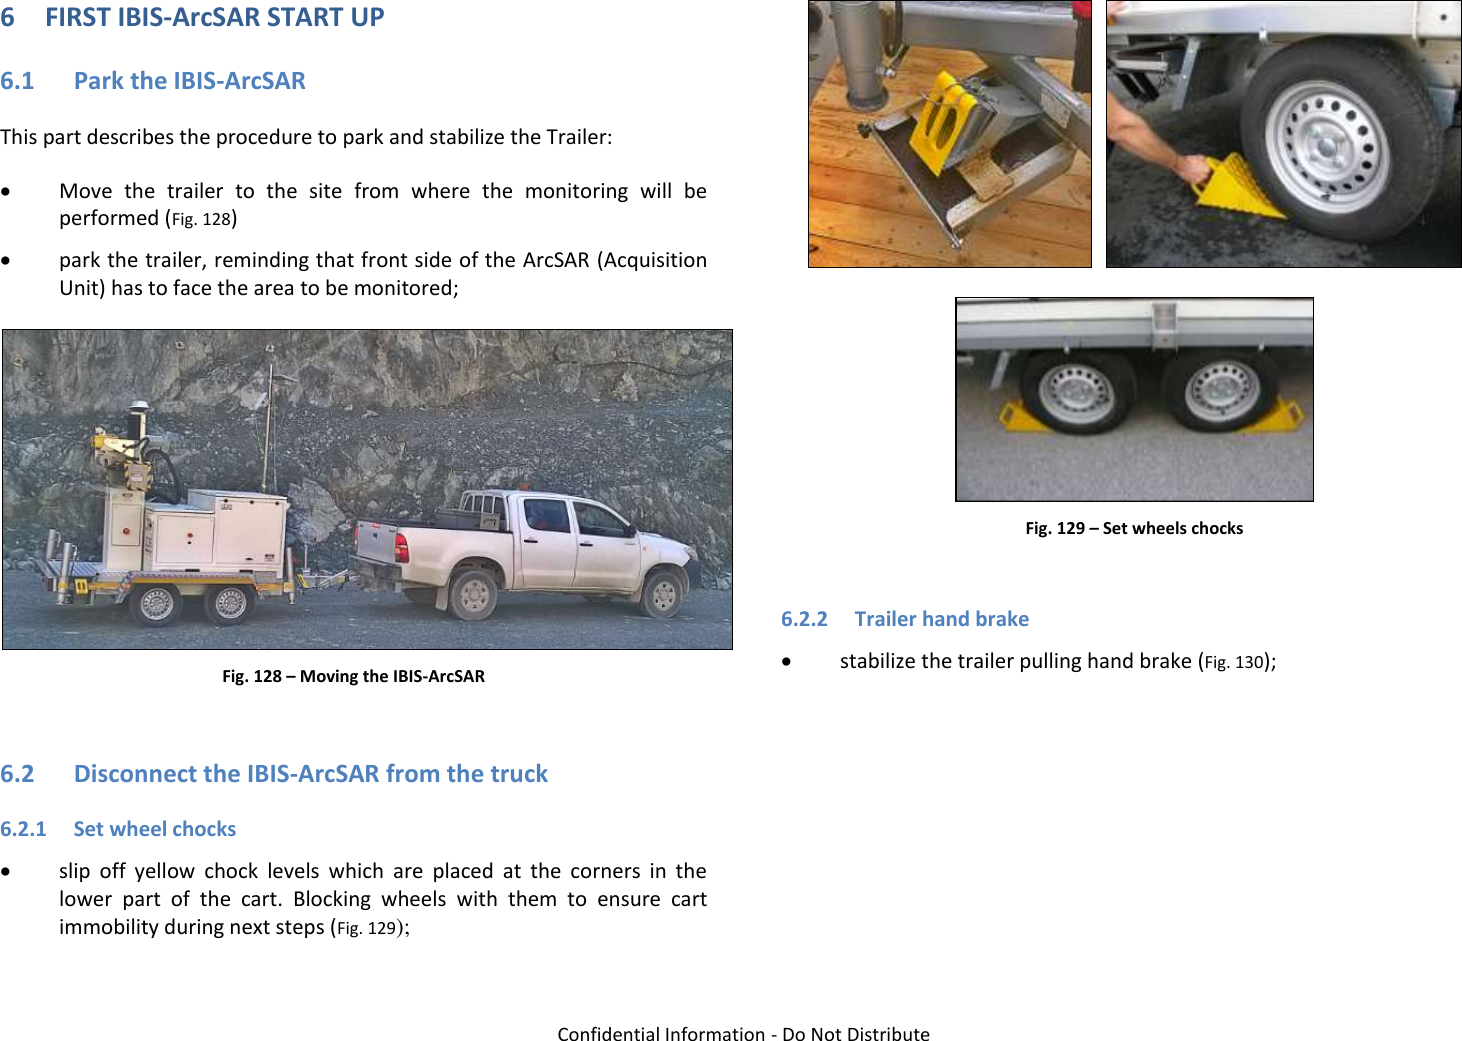   Confidential Information - Do Not Distribute 6 FIRST IBIS-ArcSAR START UP 6.1 Park the IBIS-ArcSAR This part describes the procedure to park and stabilize the Trailer:  Move  the  trailer  to  the  site  from  where  the  monitoring  will  be performed (Fig. 128)  park the trailer, reminding that front side of the ArcSAR (Acquisition Unit) has to face the area to be monitored;  Fig. 128 – Moving the IBIS-ArcSAR  6.2 Disconnect the IBIS-ArcSAR from the truck 6.2.1 Set wheel chocks  slip  off  yellow  chock  levels  which  are  placed  at  the  corners  in  the lower  part  of  the  cart.  Blocking  wheels  with  them  to  ensure  cart immobility during next steps (Fig. 129);      Fig. 129 – Set wheels chocks  6.2.2 Trailer hand brake  stabilize the trailer pulling hand brake (Fig. 130); 